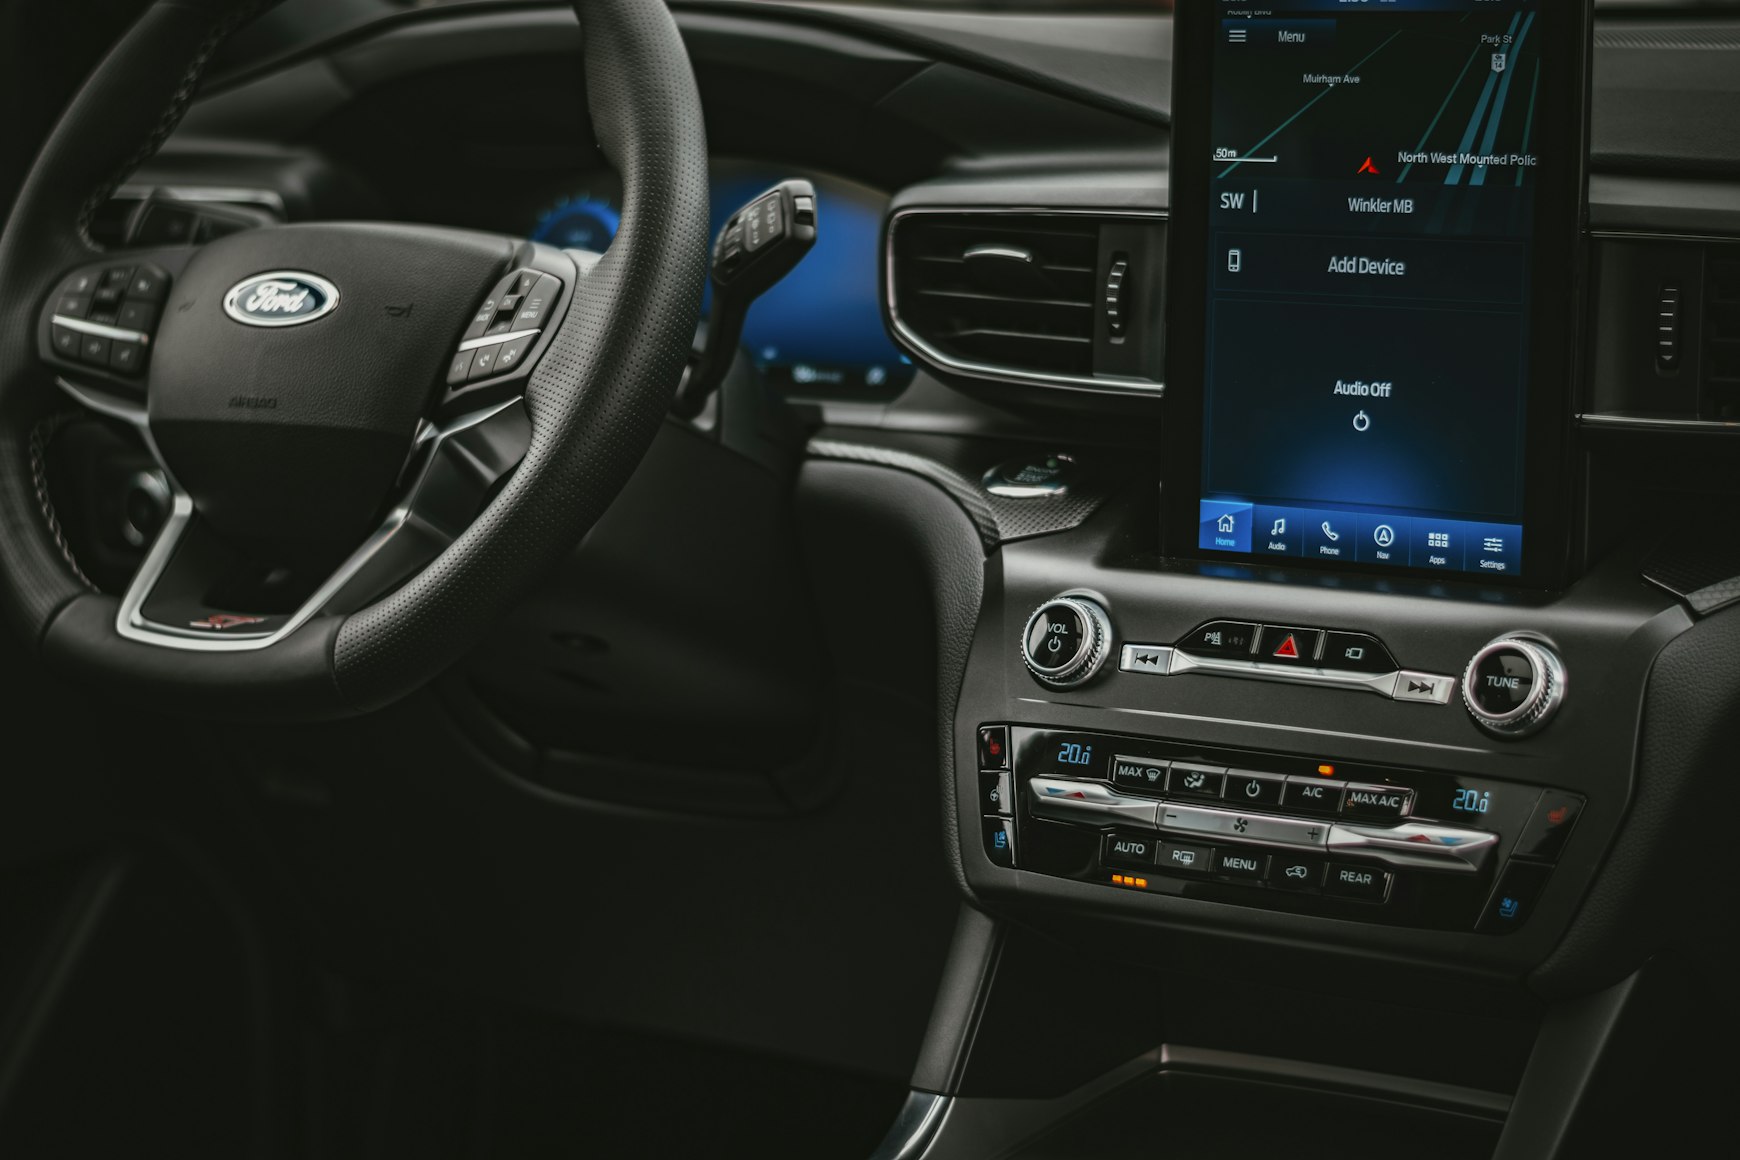 Interior of a Ford model with a view of a dashboard screen and steering wheel.